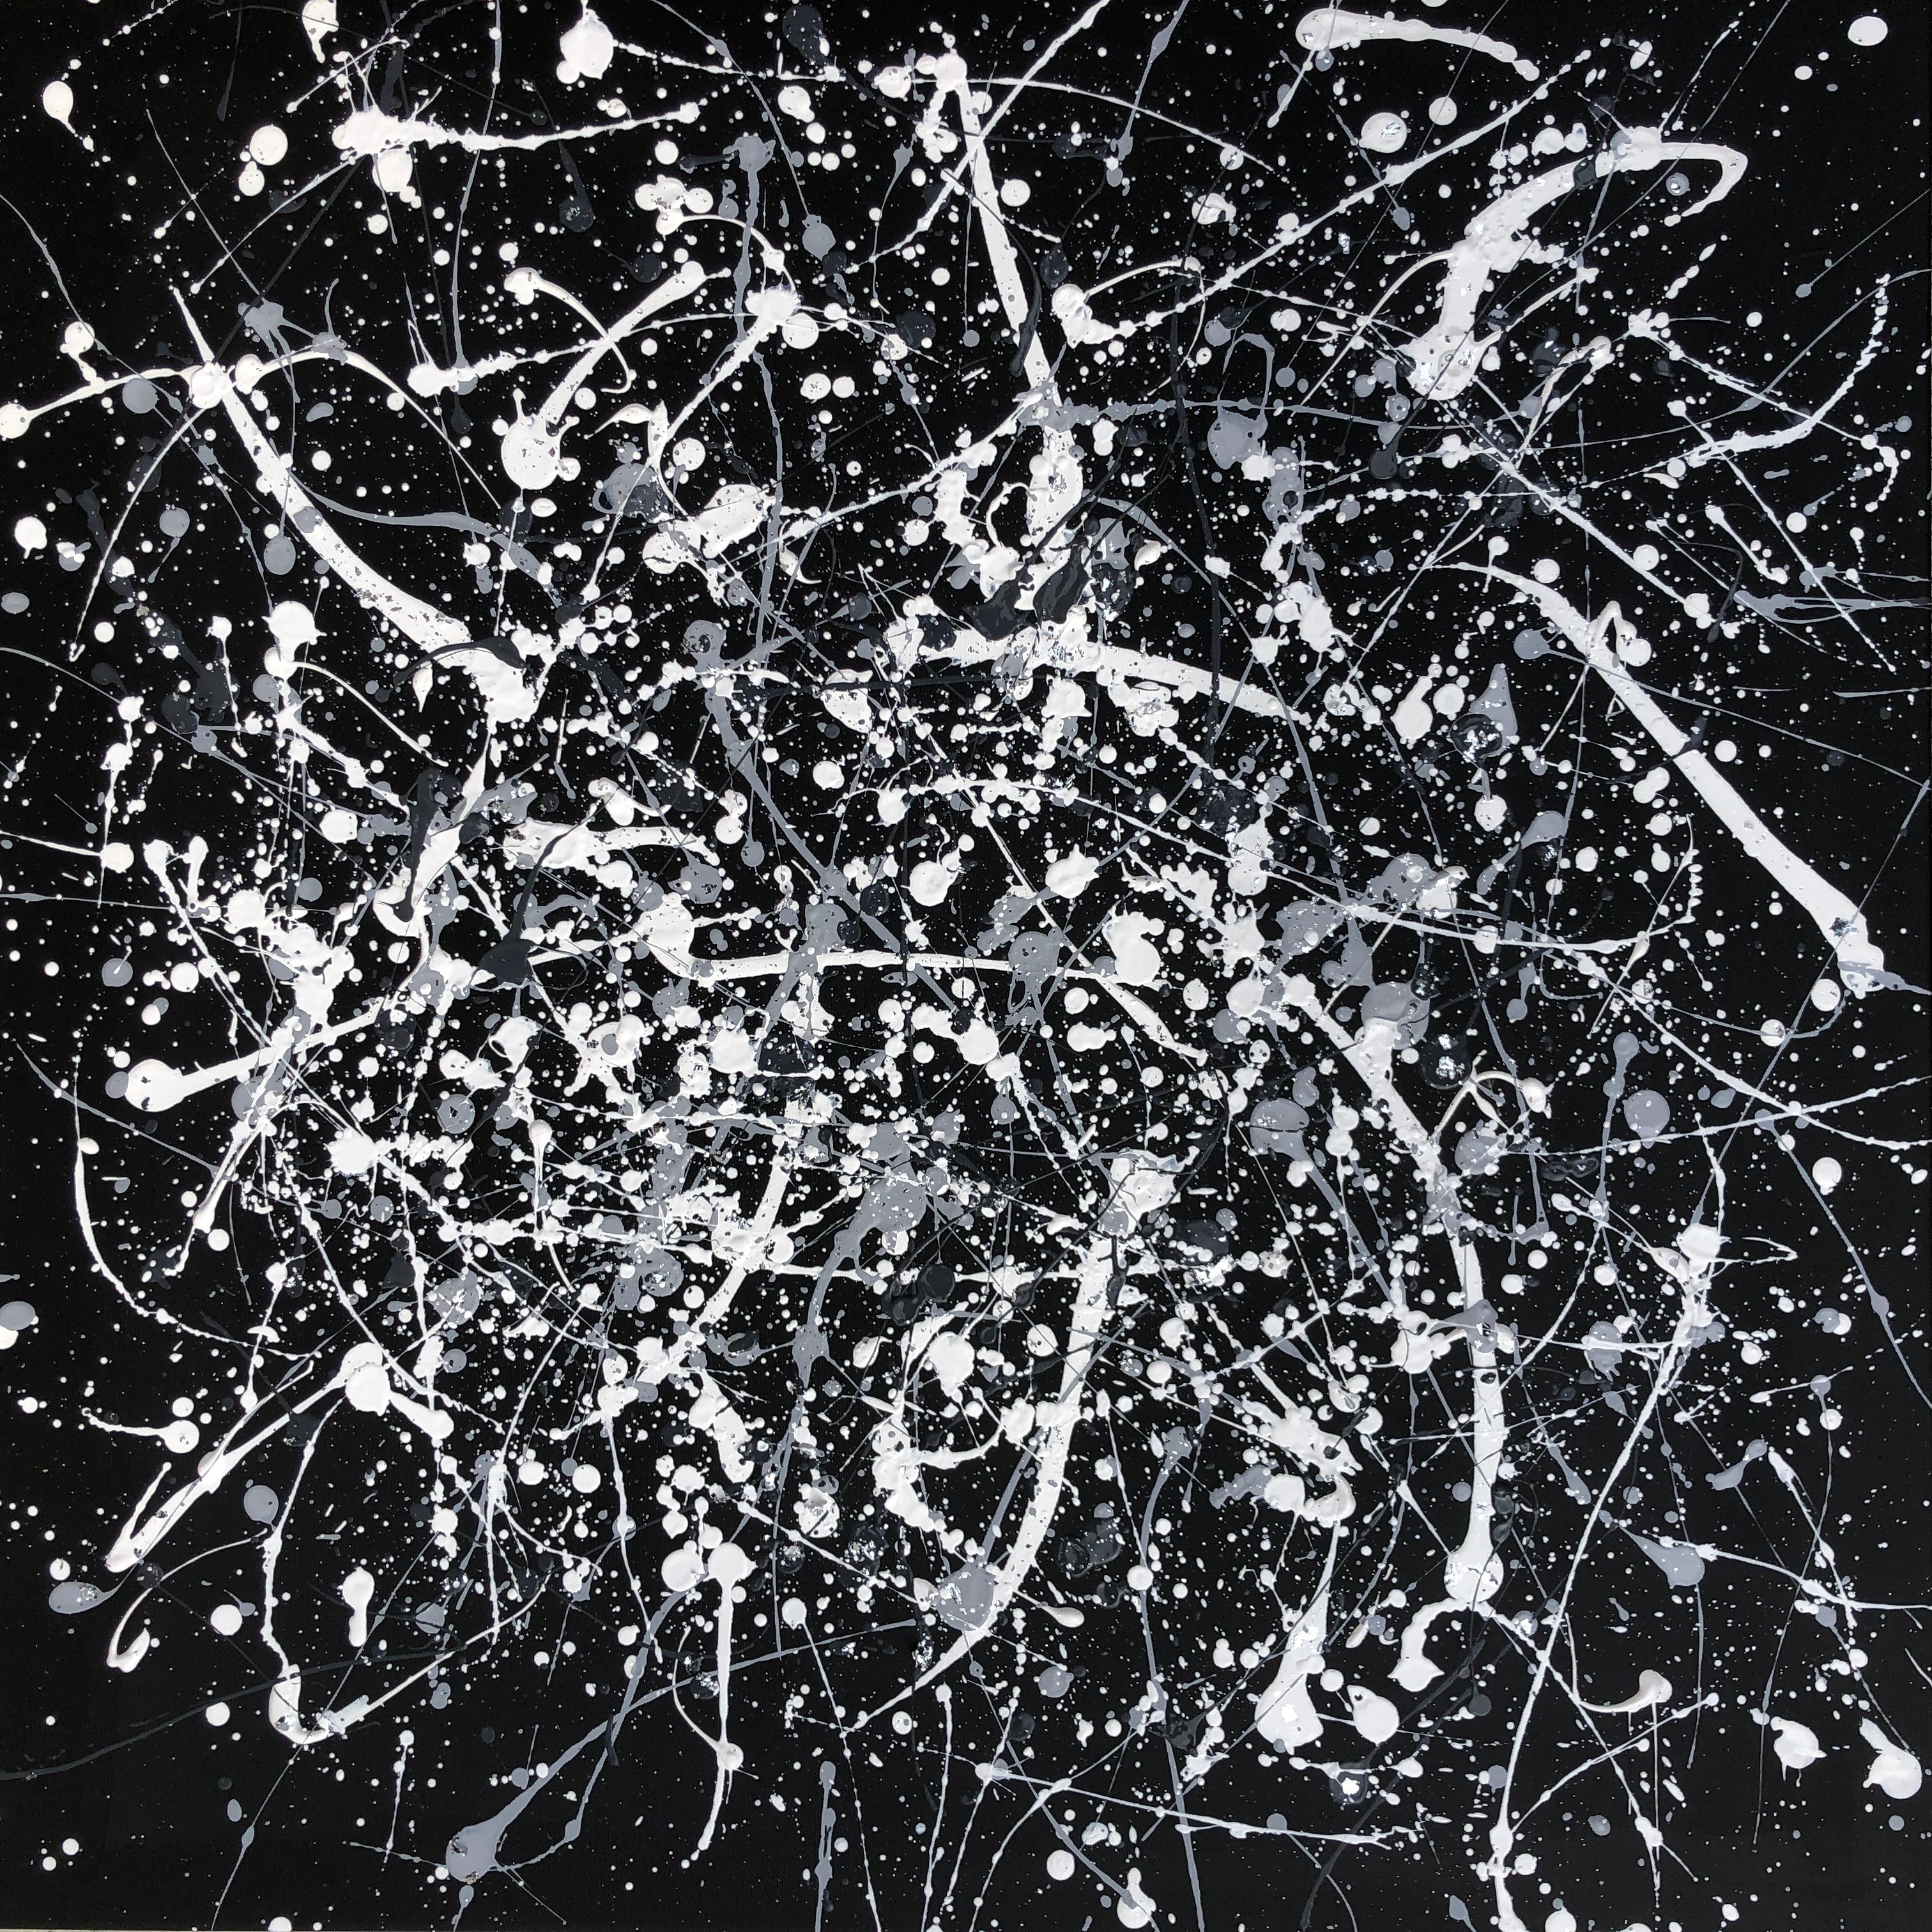 Exhibition history:
Solo Exhibition: Infinite Flight
Dates: 30 Jul 2023 - 18 Aug 2023
Venue: Bilous Gallery, Rampersttorfergasse 2, Vienna

Abstract painting in the main color black with elements in white, and silver, gray.
This abstract painting is